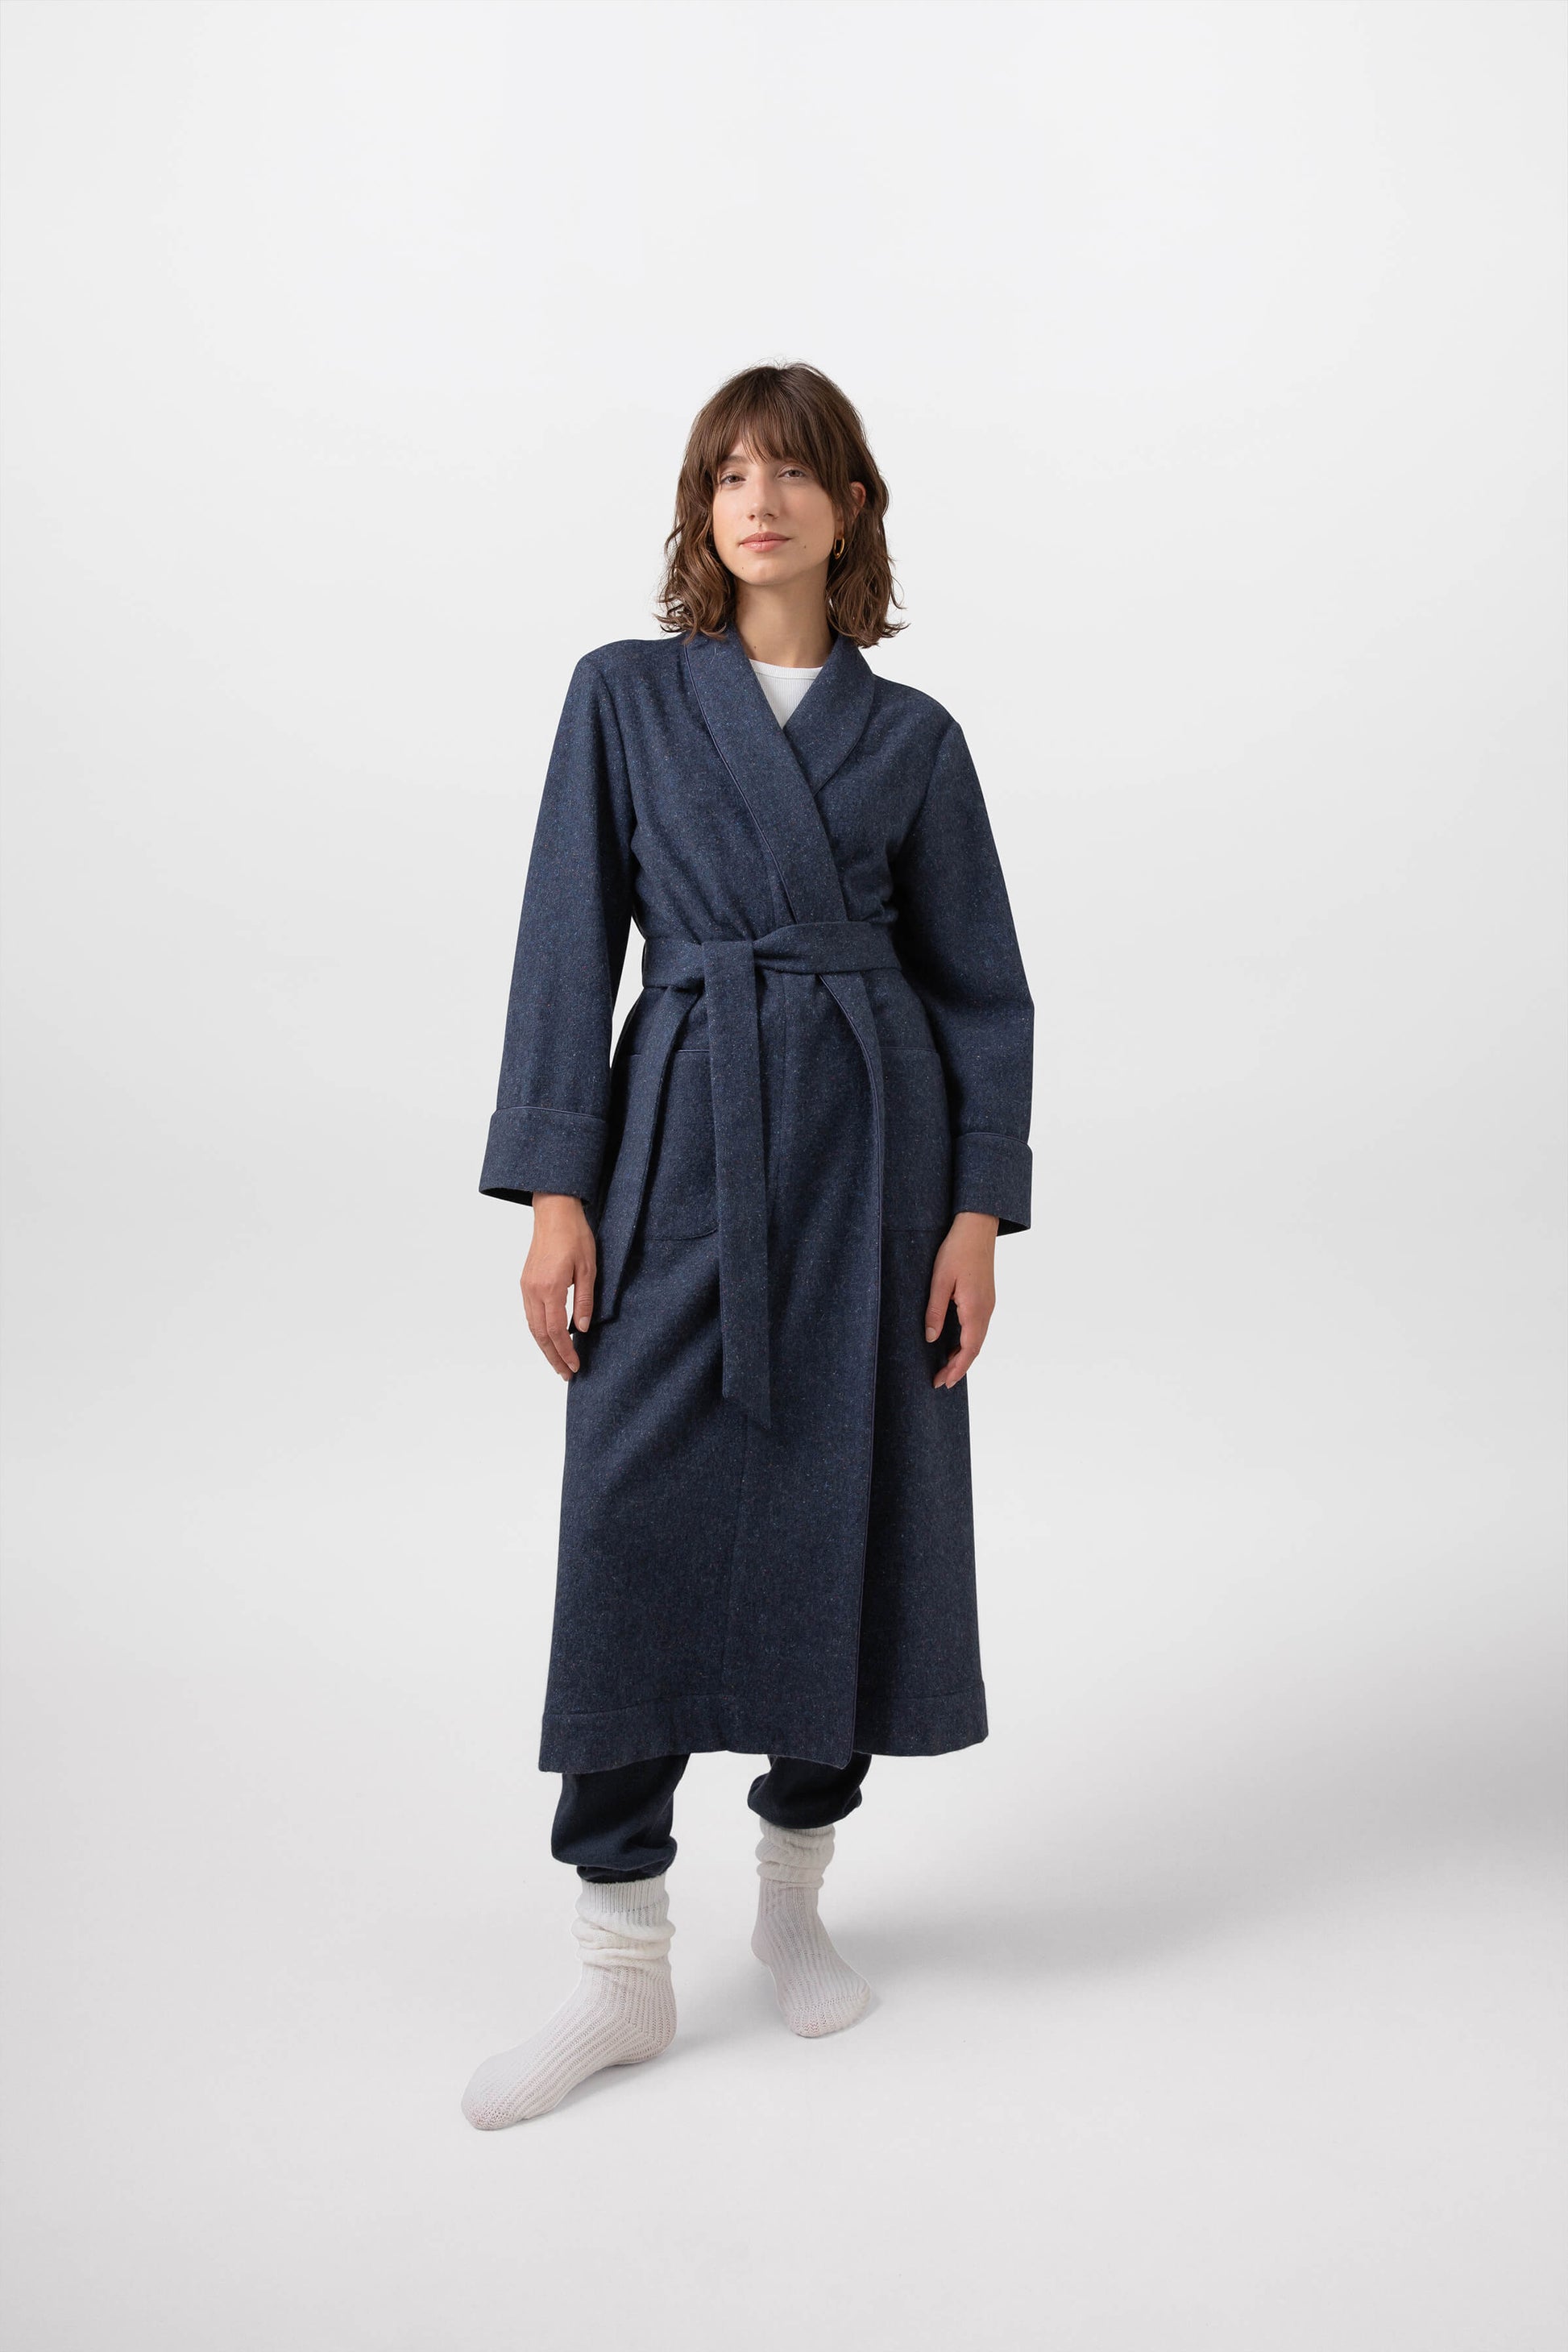 Johnstons of Elgin Women's Loungewear Navy Donegal Donegal Cashmere Dressing Gown TA000529RU7383